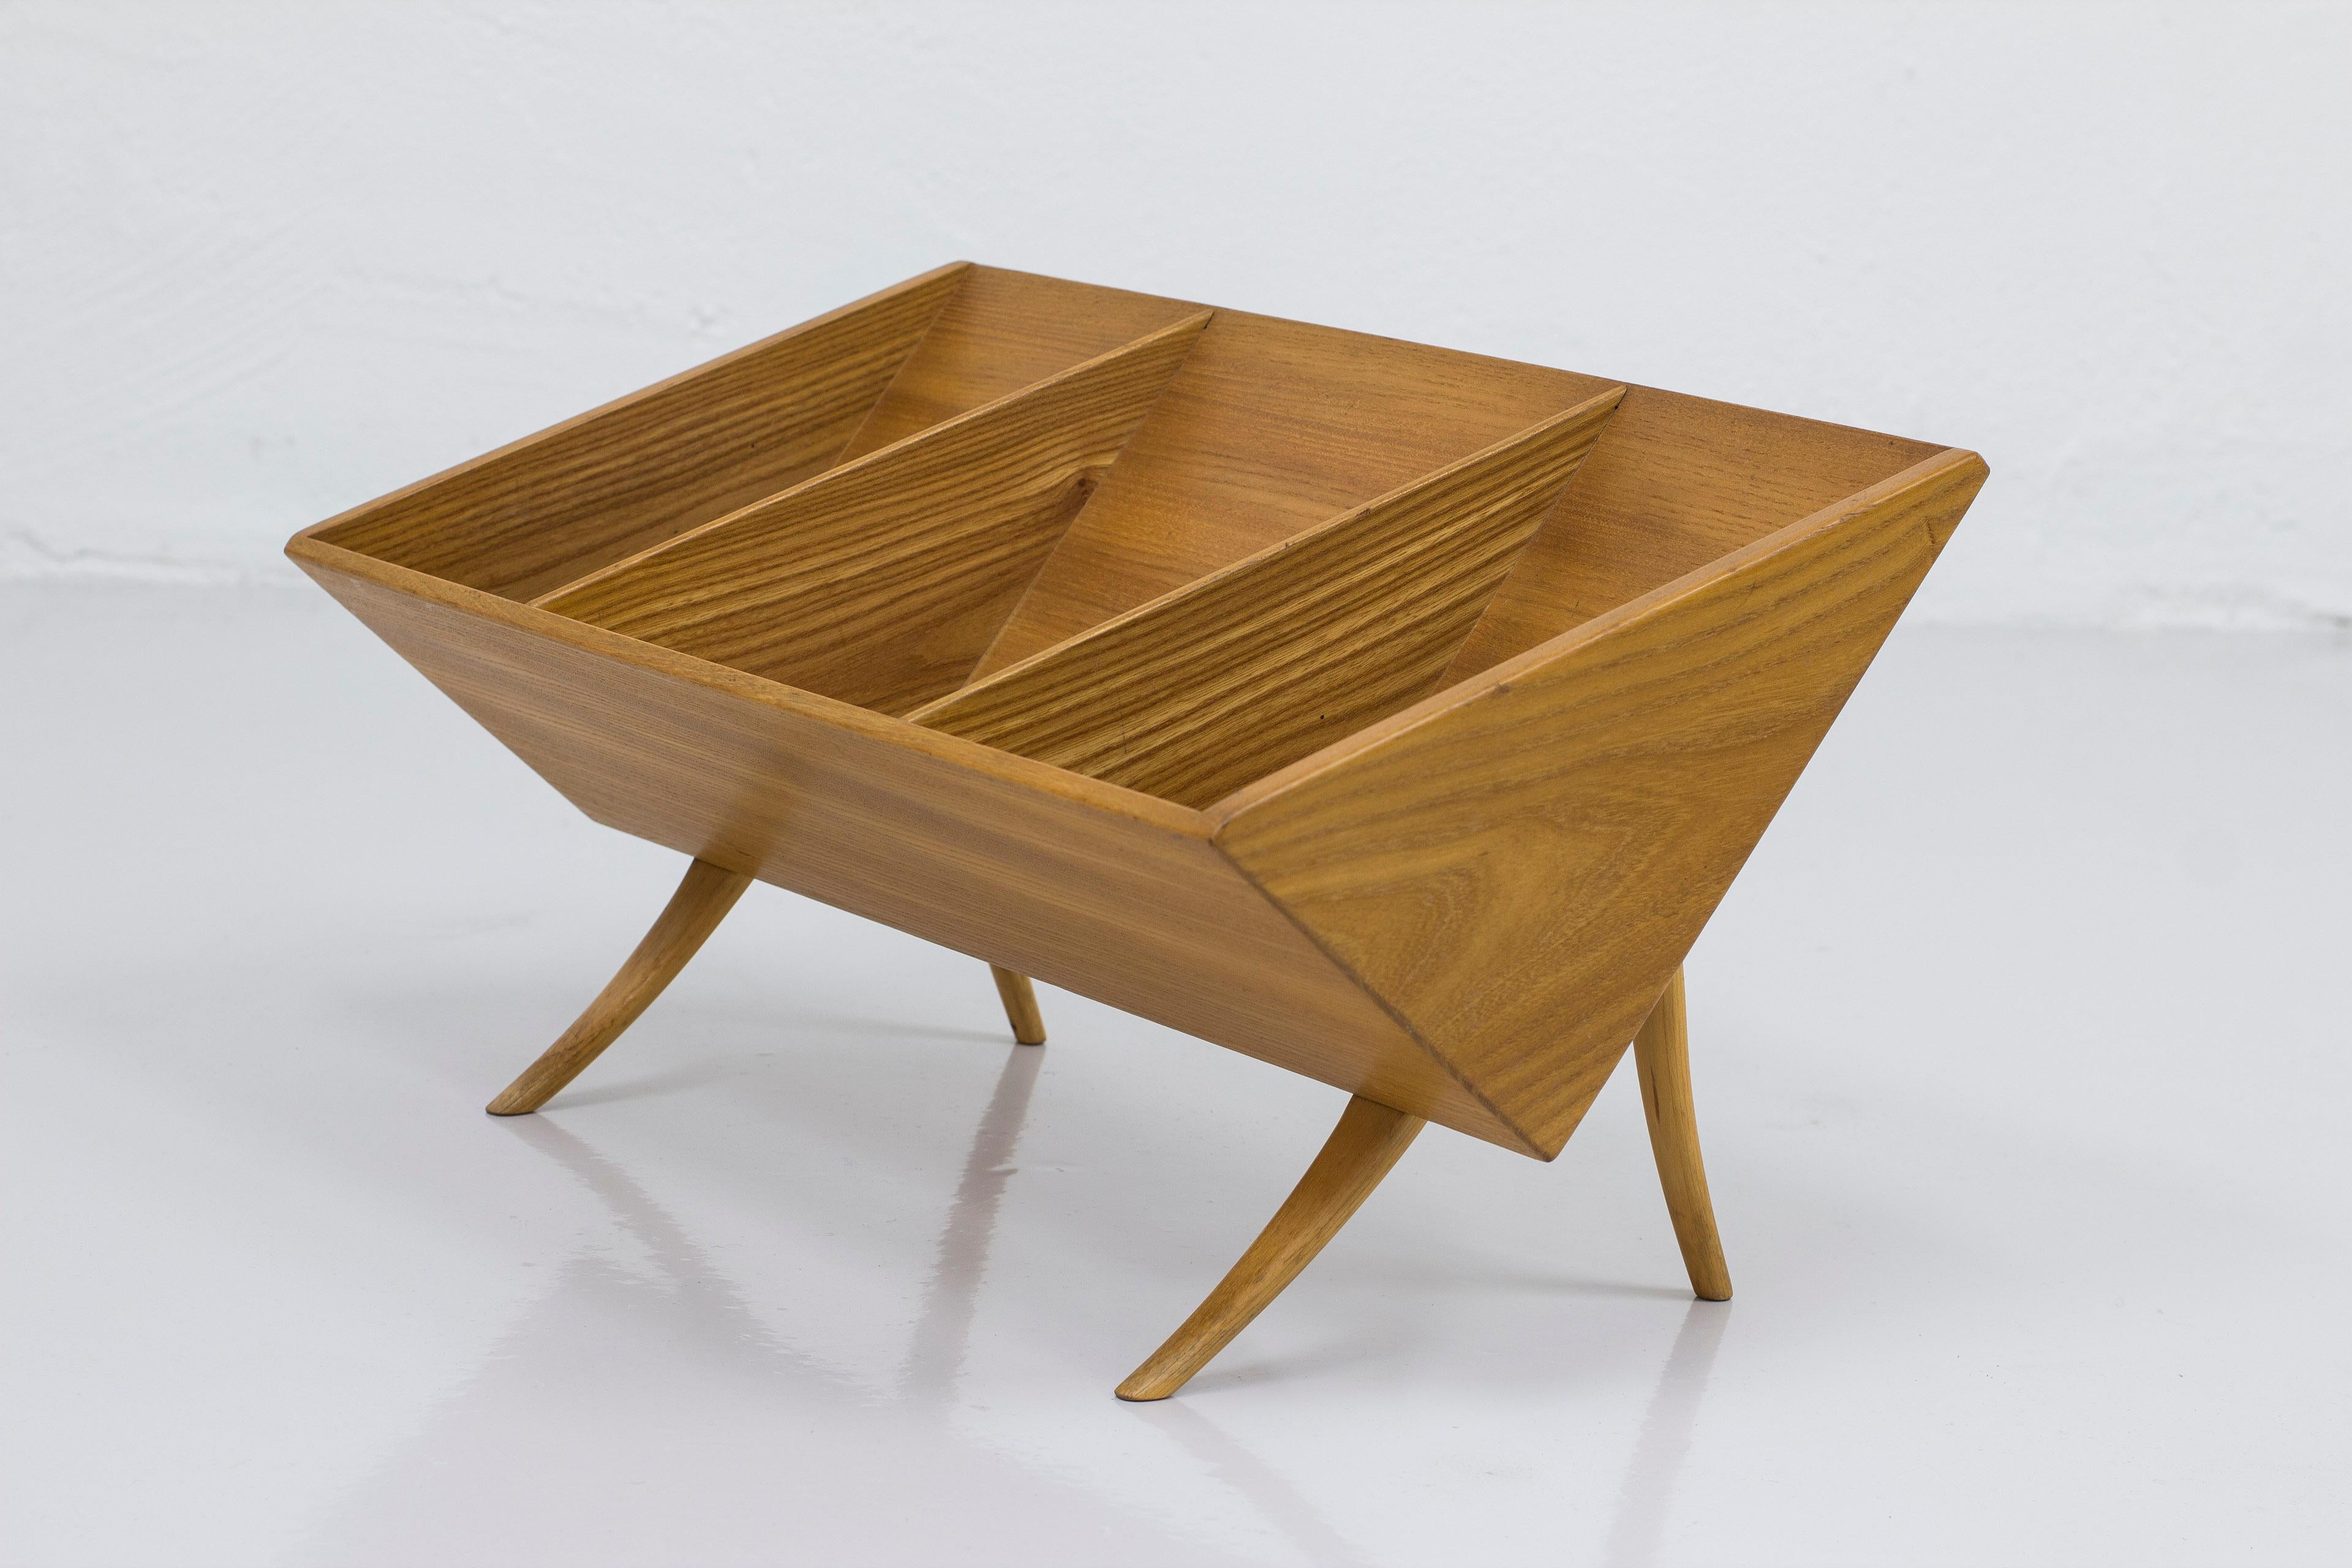 Book crib designed by bruno Mathsson in 1941. This example made by Firma Karl Mathsson in 1964. Made from solid elm and bent wood beech in the legs. Very good vintage condition with light signs of age related wear and patina.

Bruno Mathsson (13